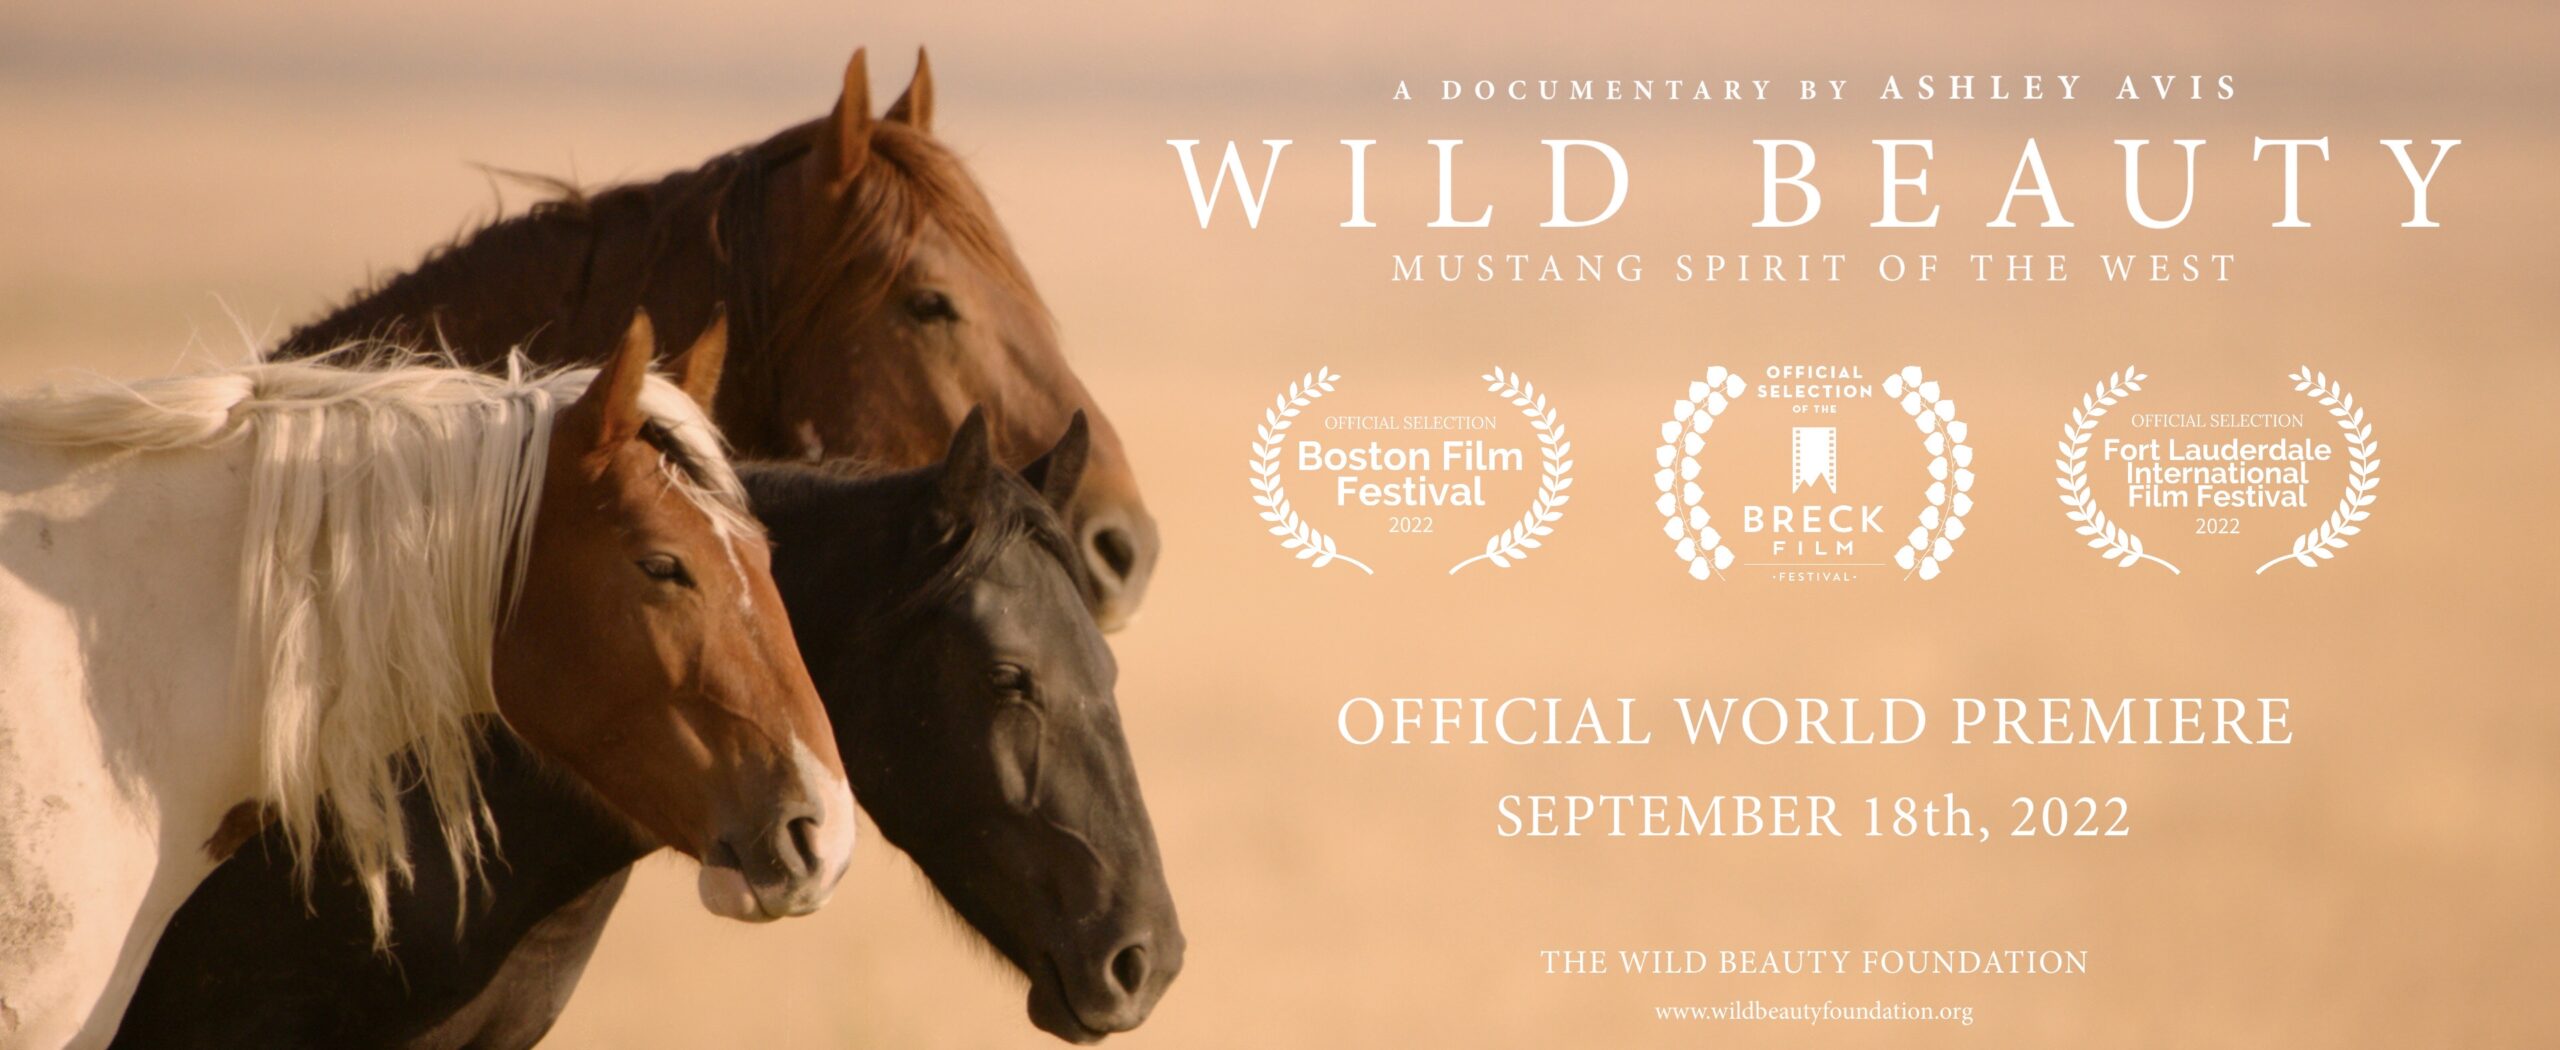 Wild Beauty: Mustang Spirit of the West Film Festival Graphic